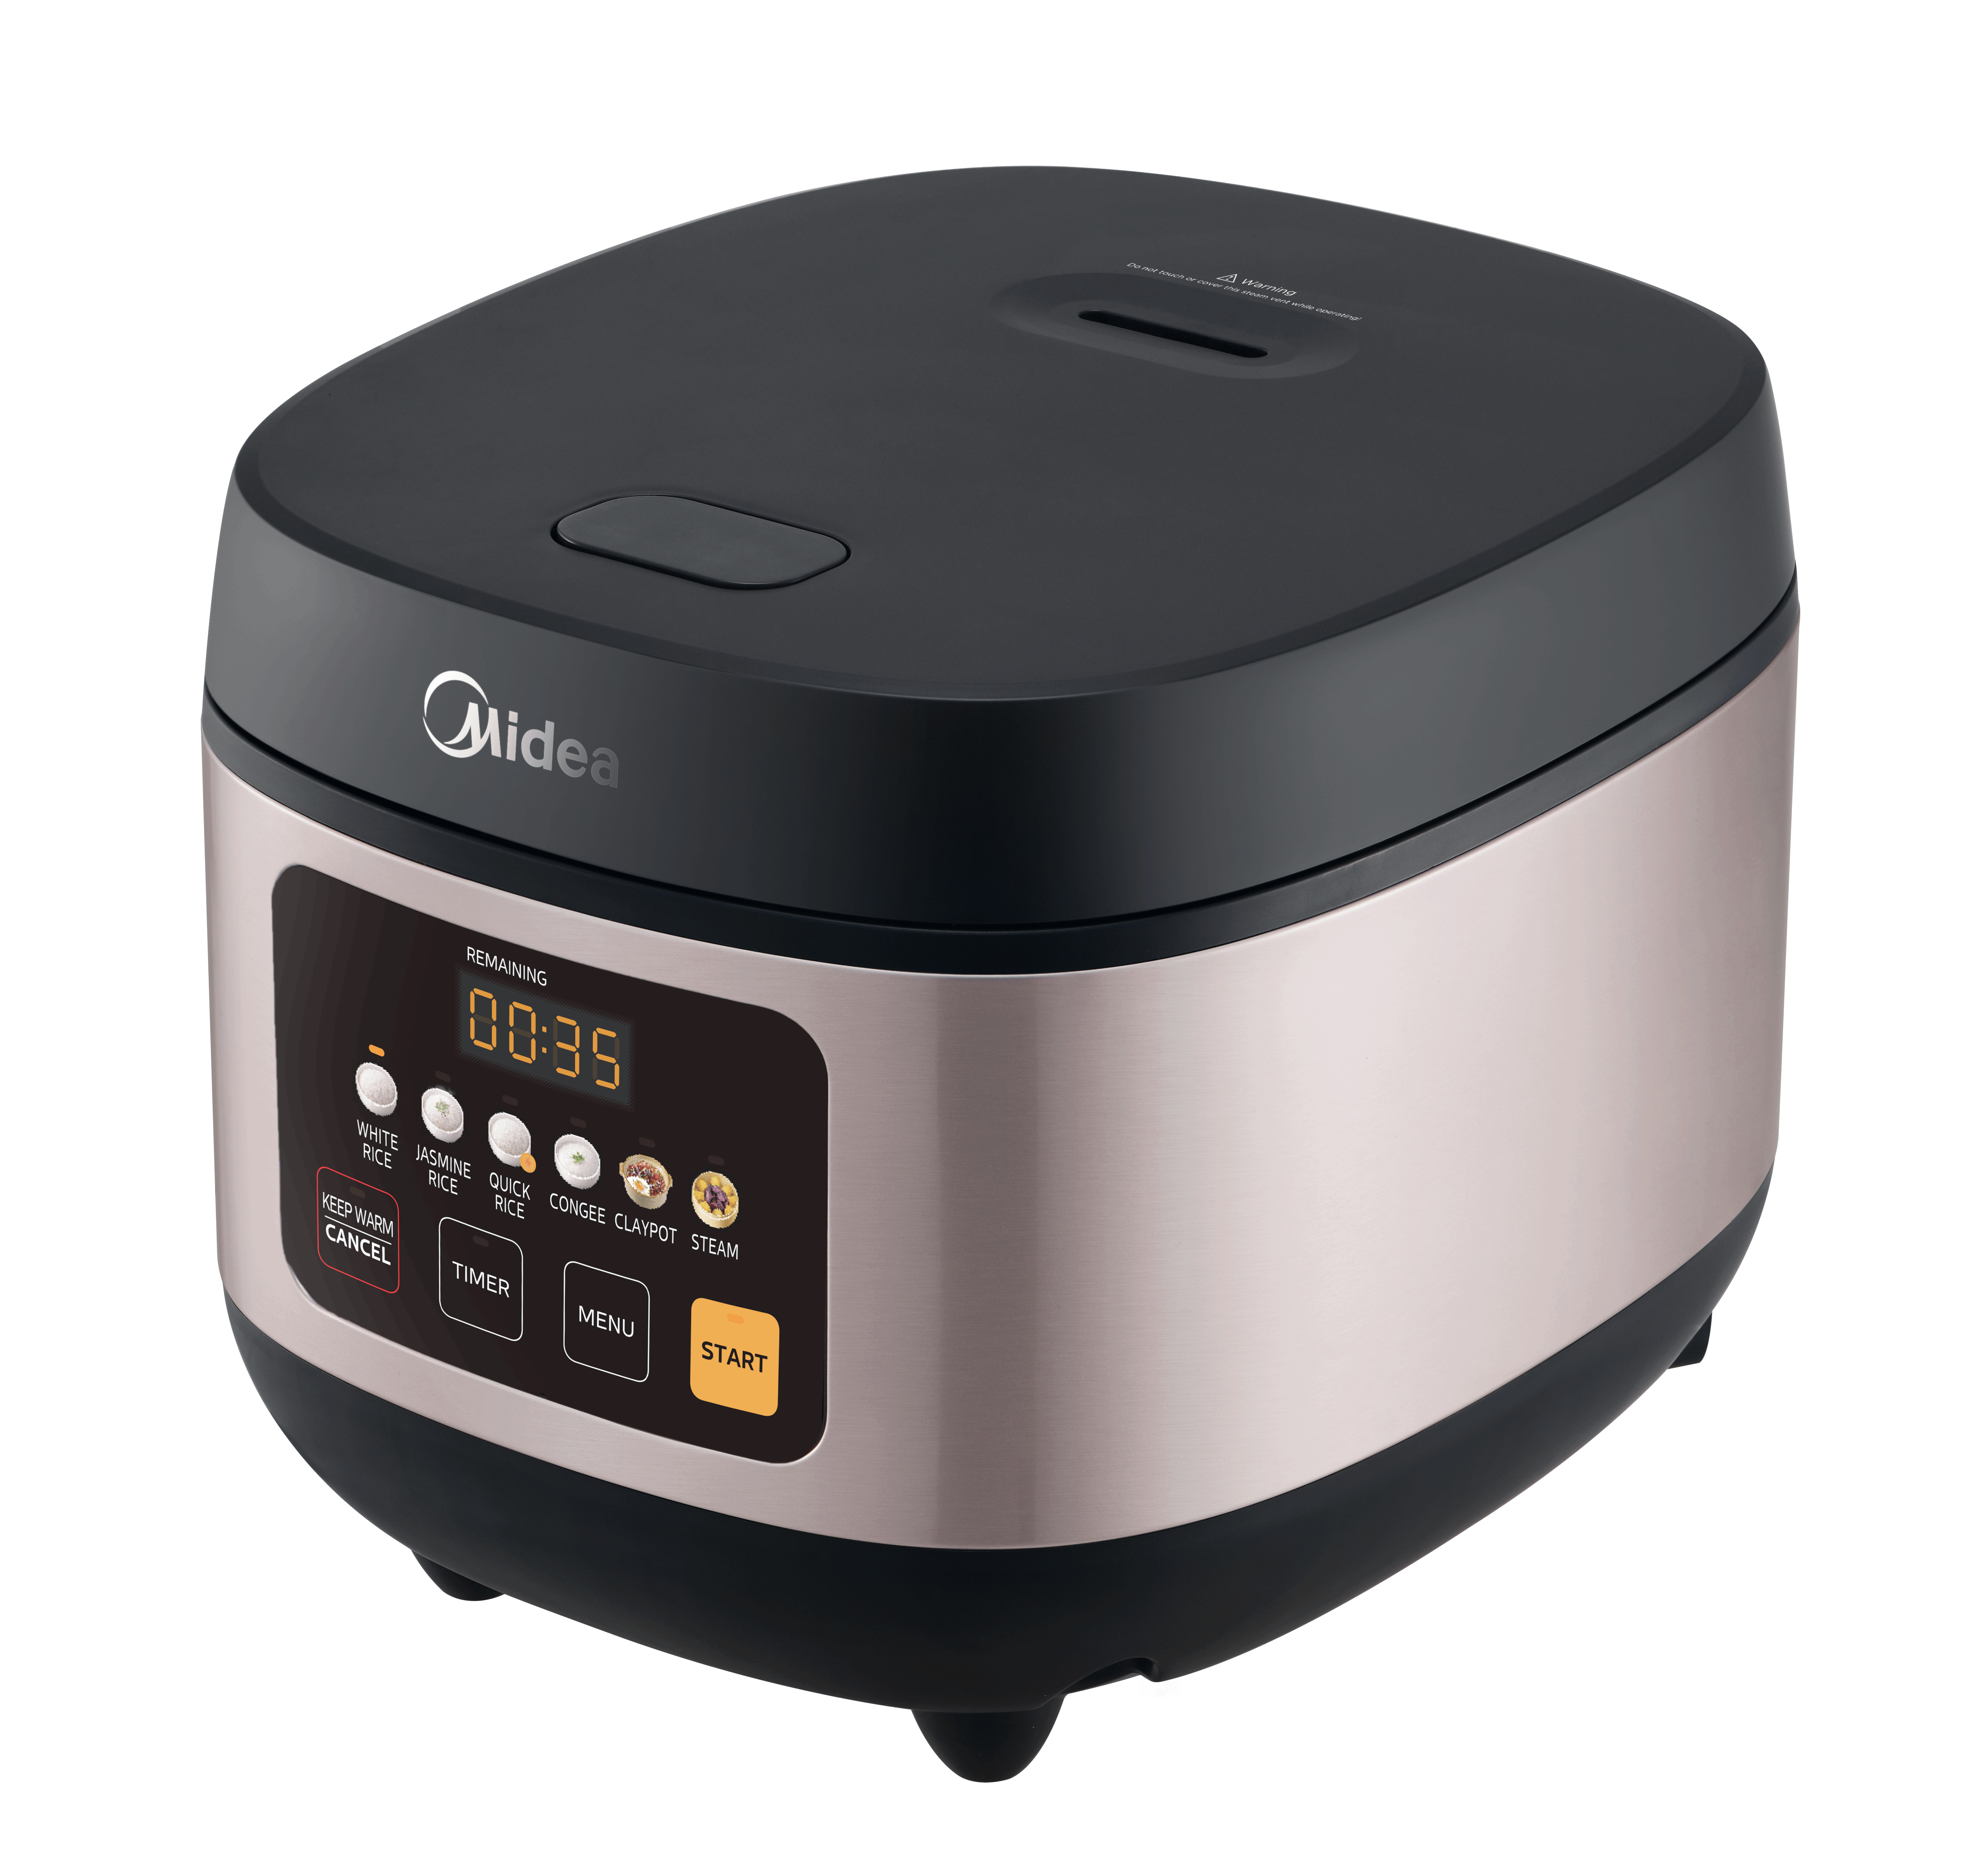 Midea rice cooker home intelligent multi-functional large capacity 4L